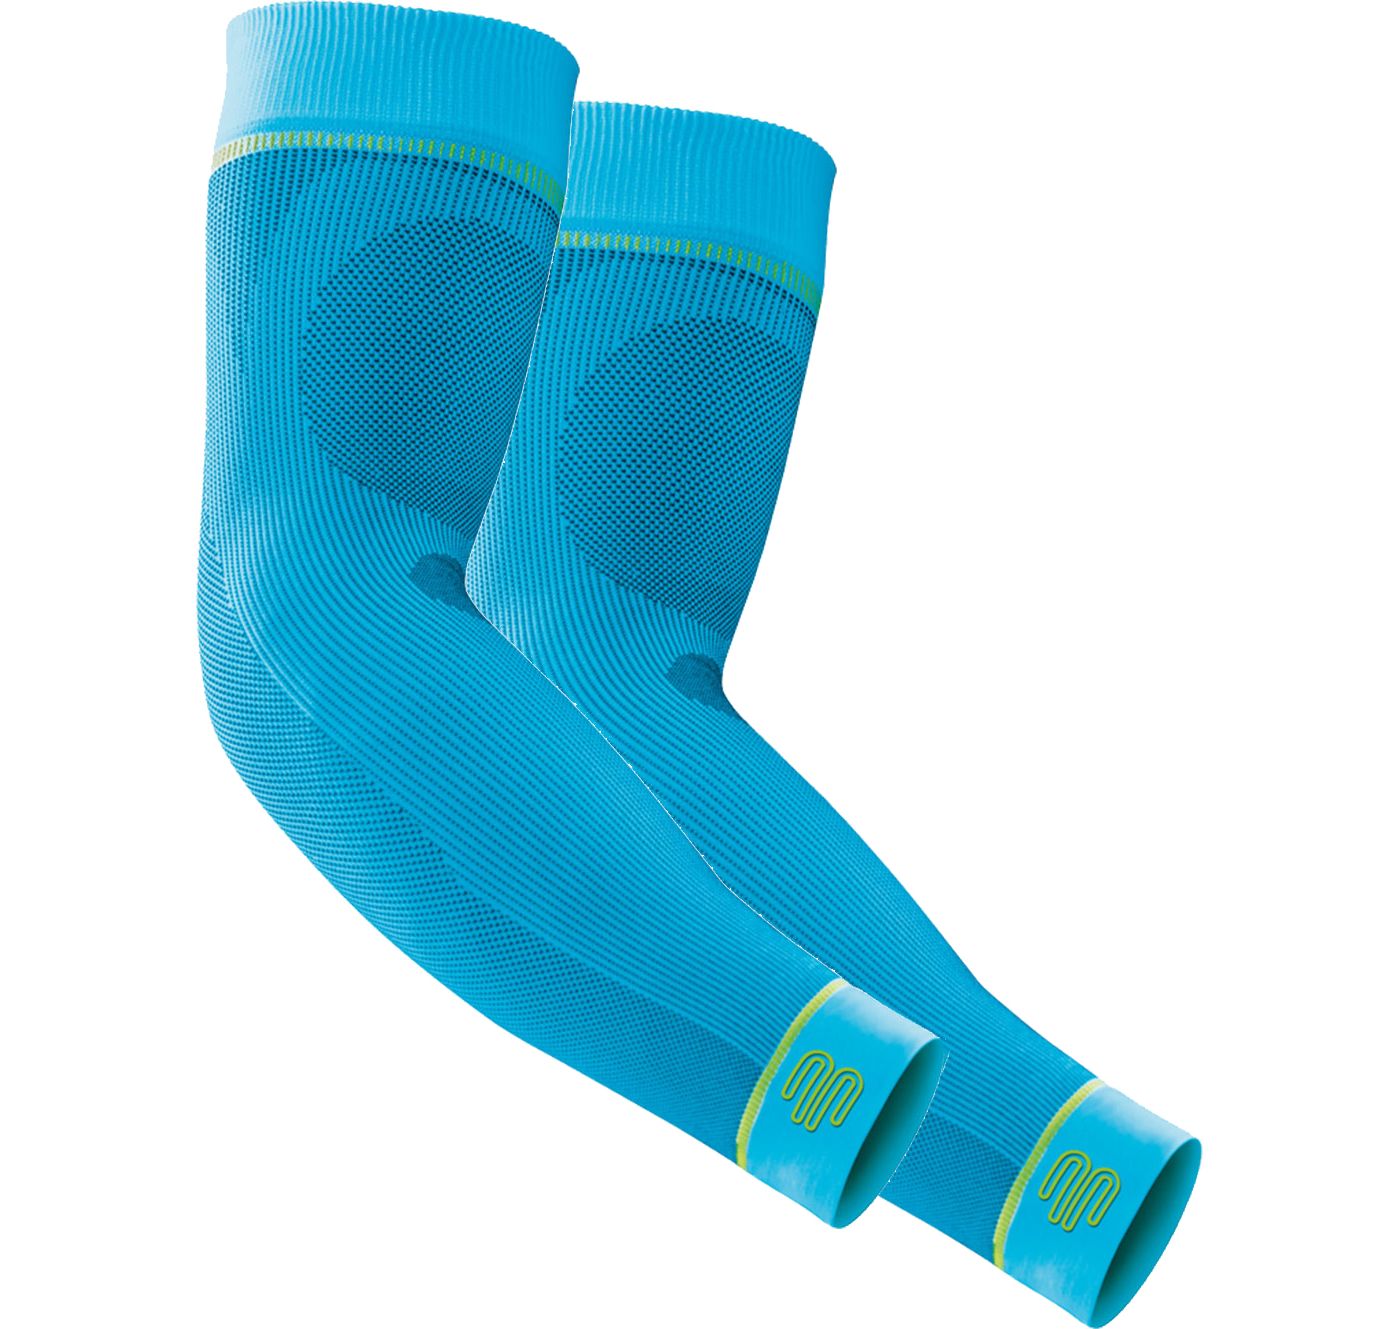 Bauerfeind Sports Compression Arm Sleeves | DICK'S Sporting Goods